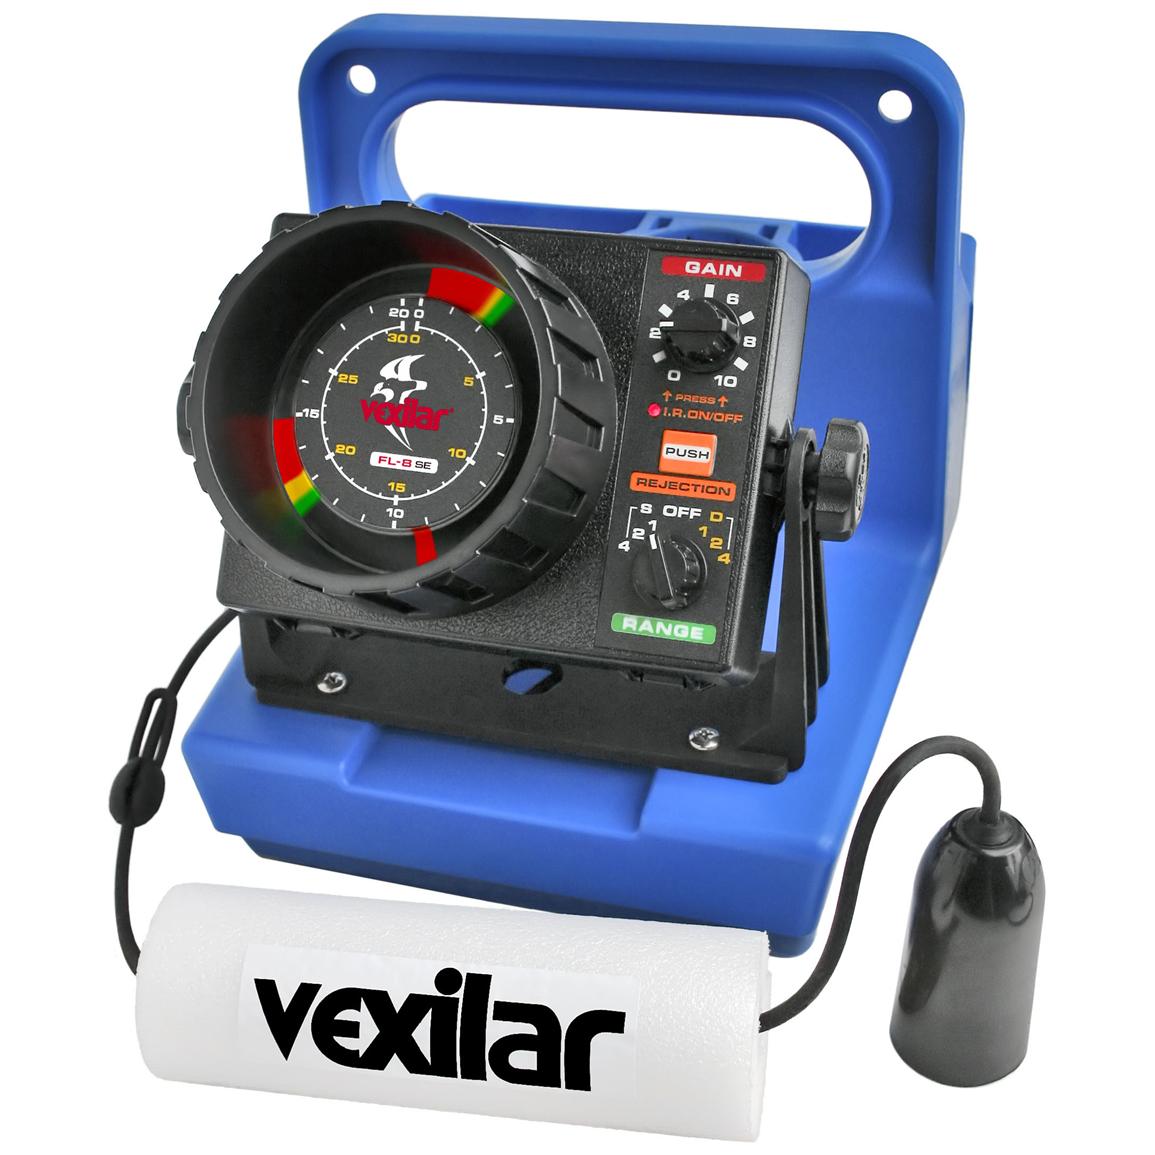 The FL-8se® Genz Pack with 19° Ice - Ducer from Vexilar®